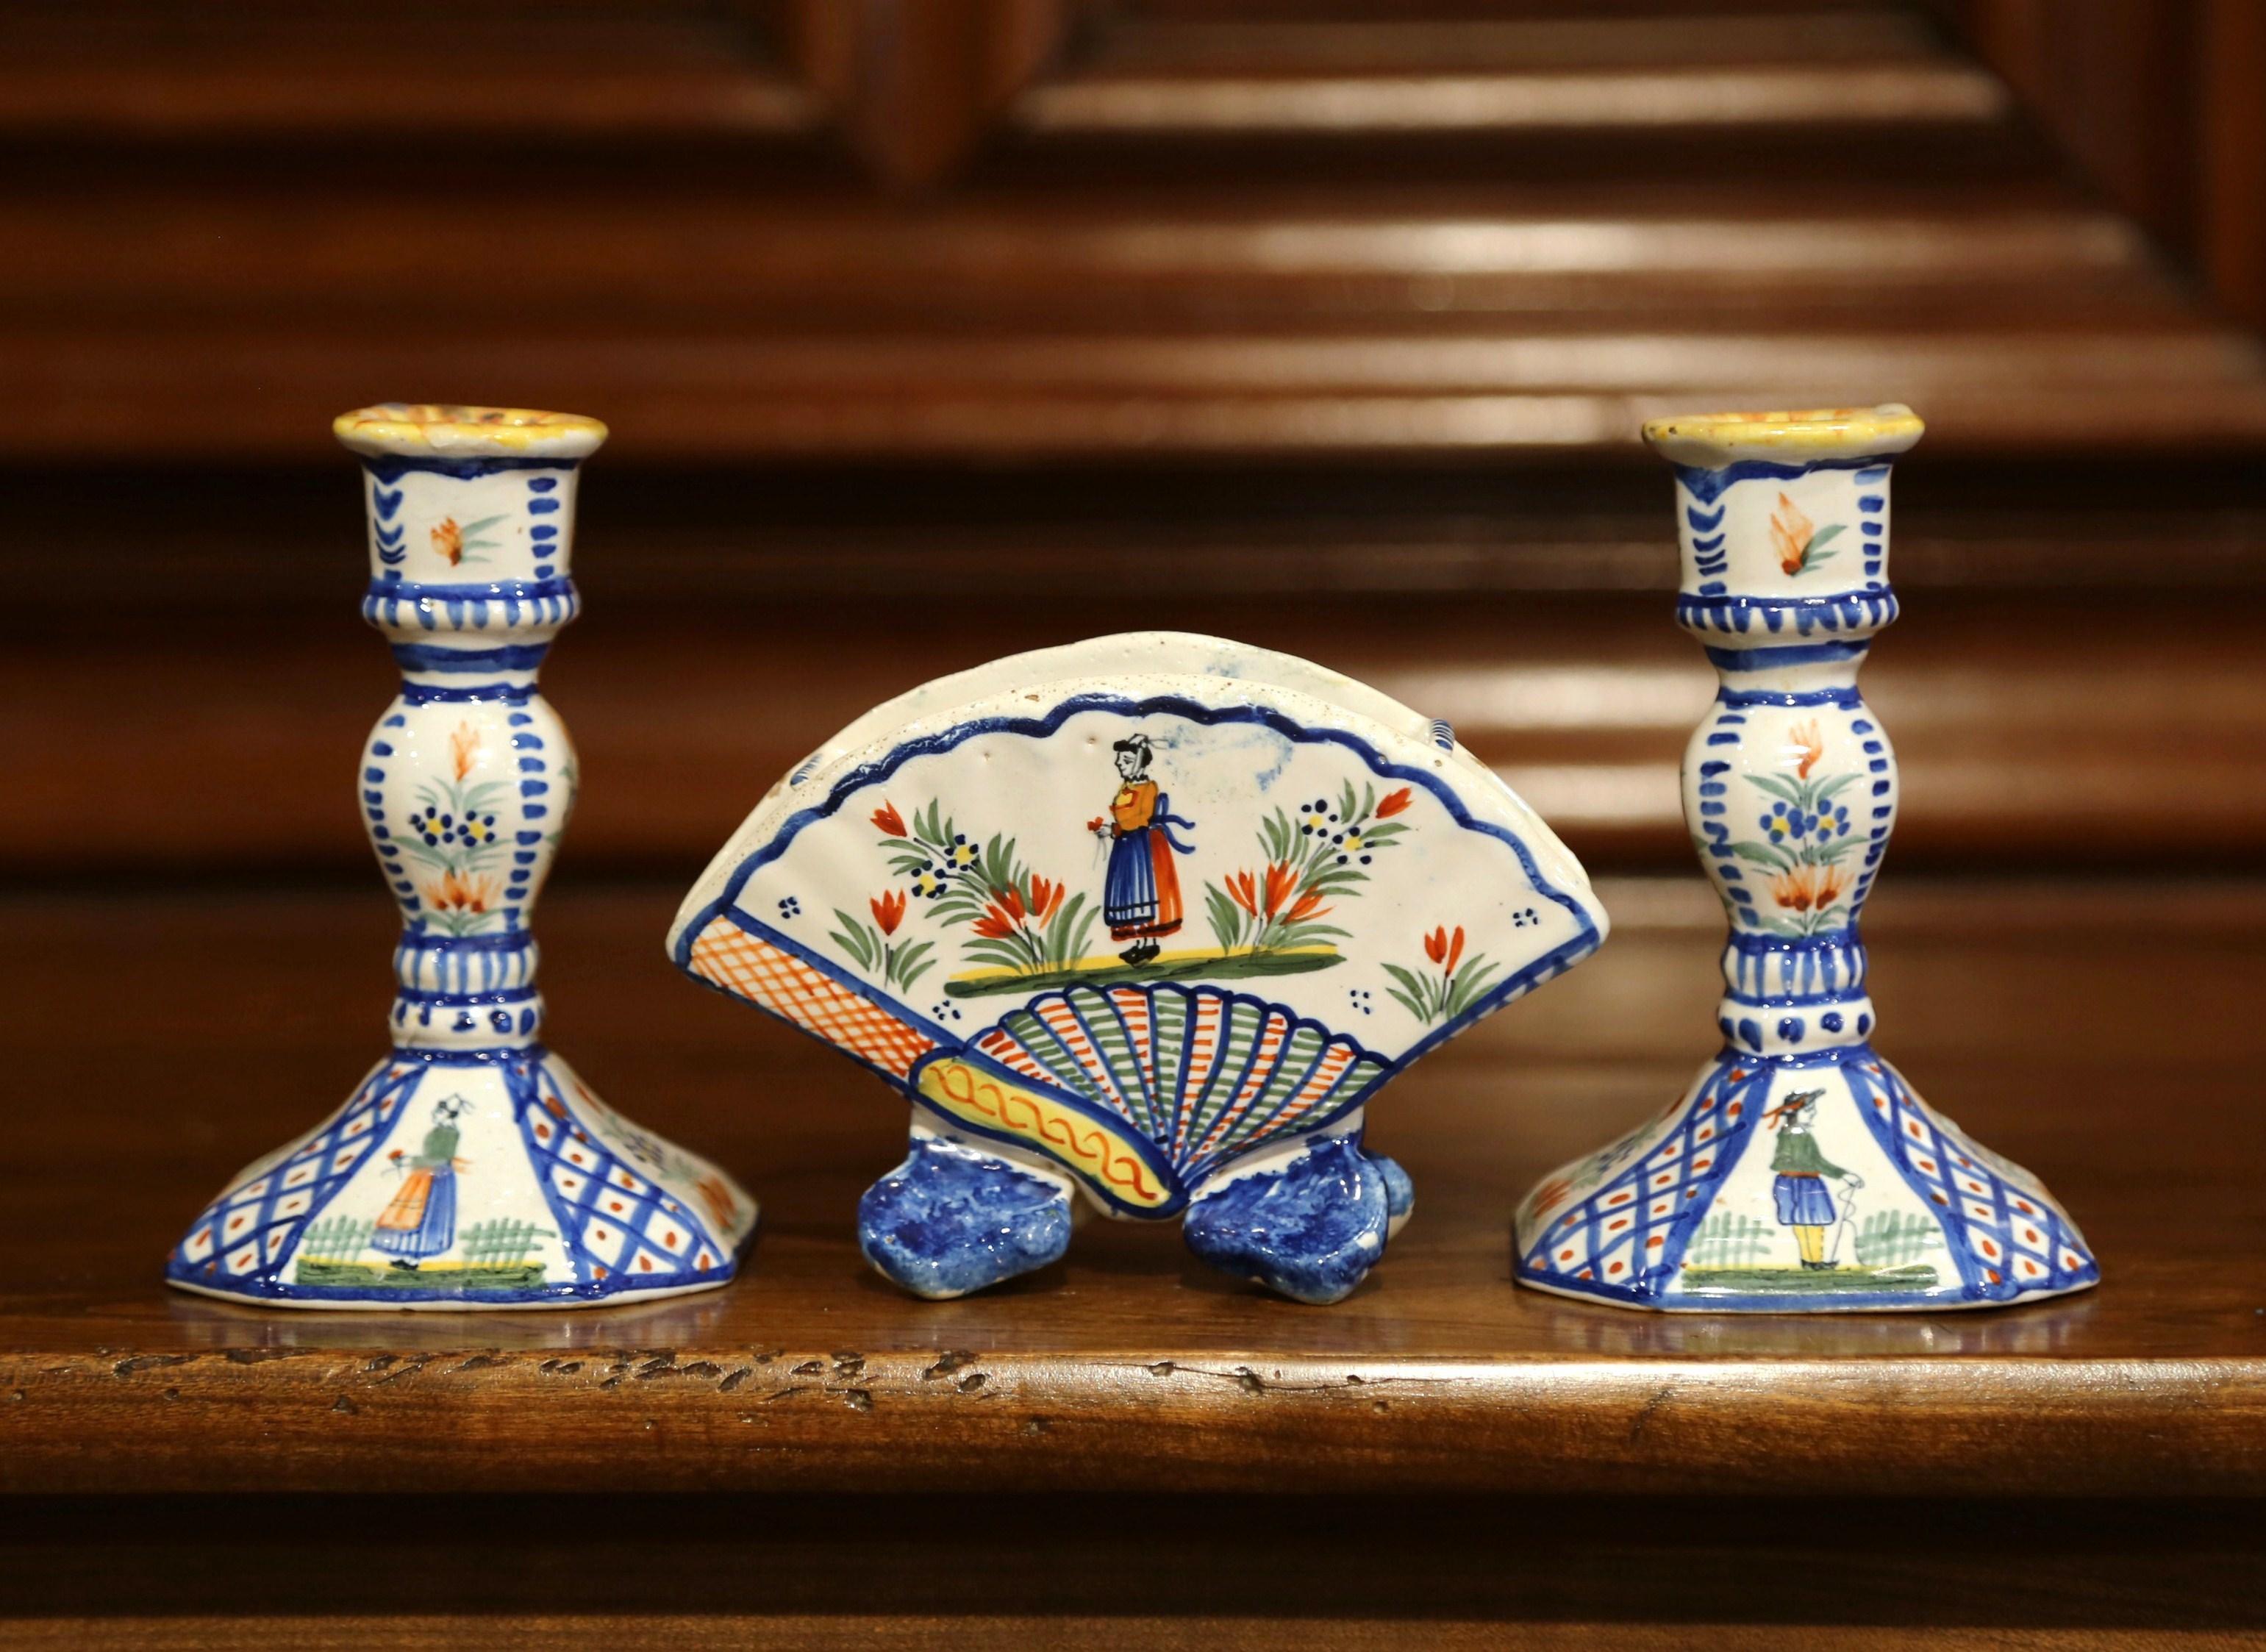 Decorate a shelf with these three faience pieces from Quimper, crafted by Henriot in Brittany, circa 1950, the colorful set includes two candlesticks with hand painted Breton figures and floral decor, and a matching flower vase with Breton woman.